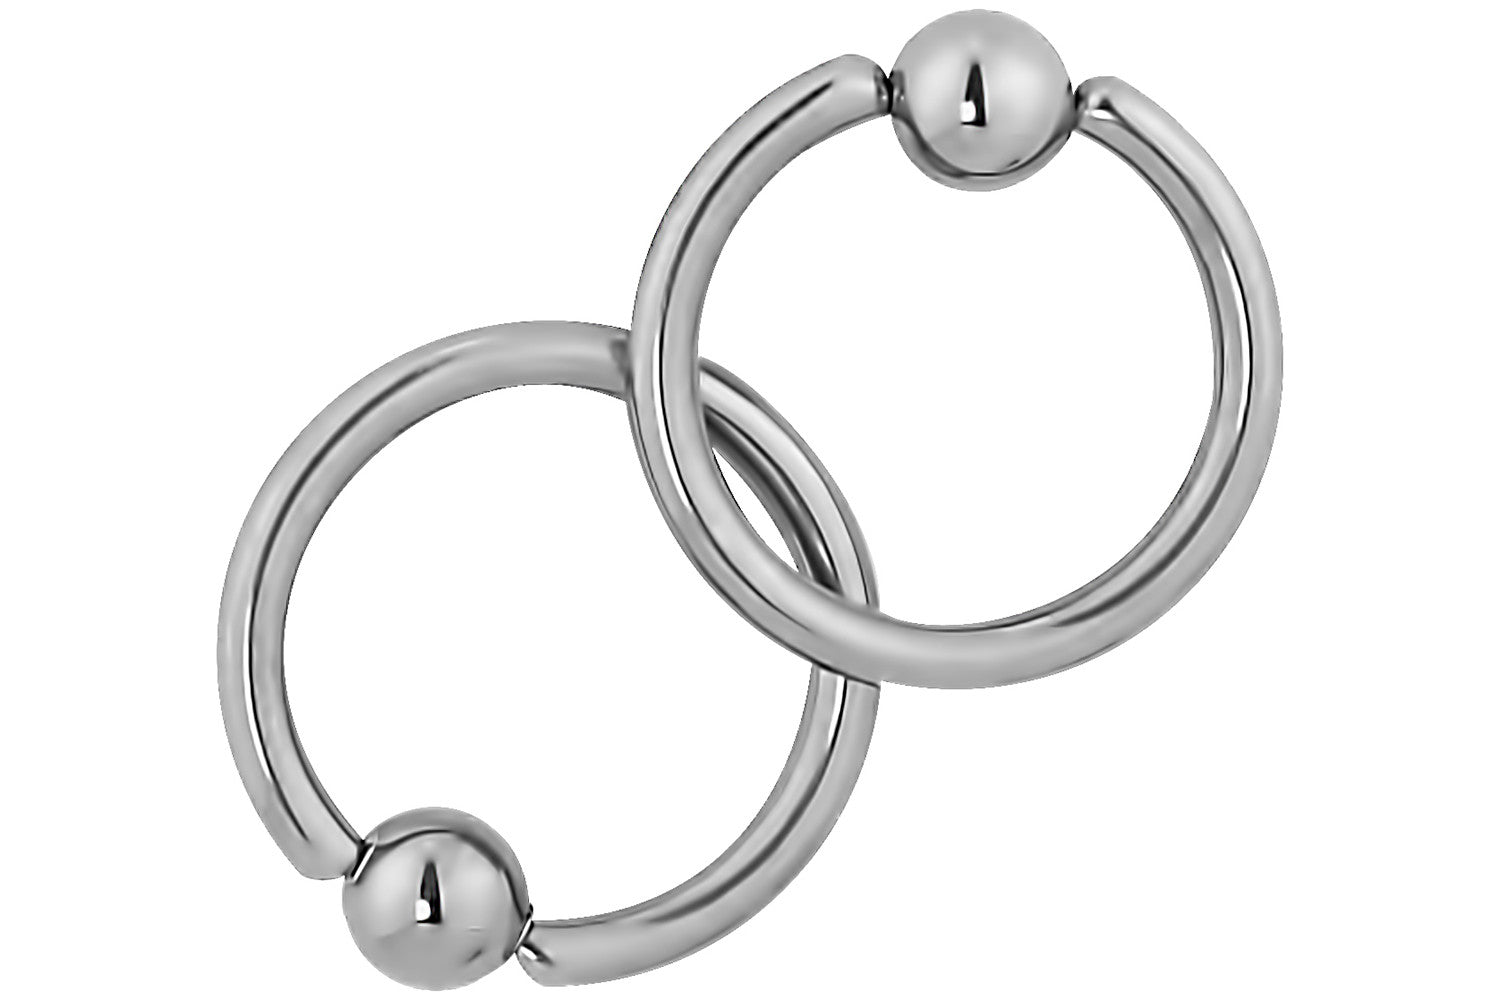 These 14 gauge rings are hypoallergenic and nickel free. They can be worn in a variety of 14 gauge body piercings.